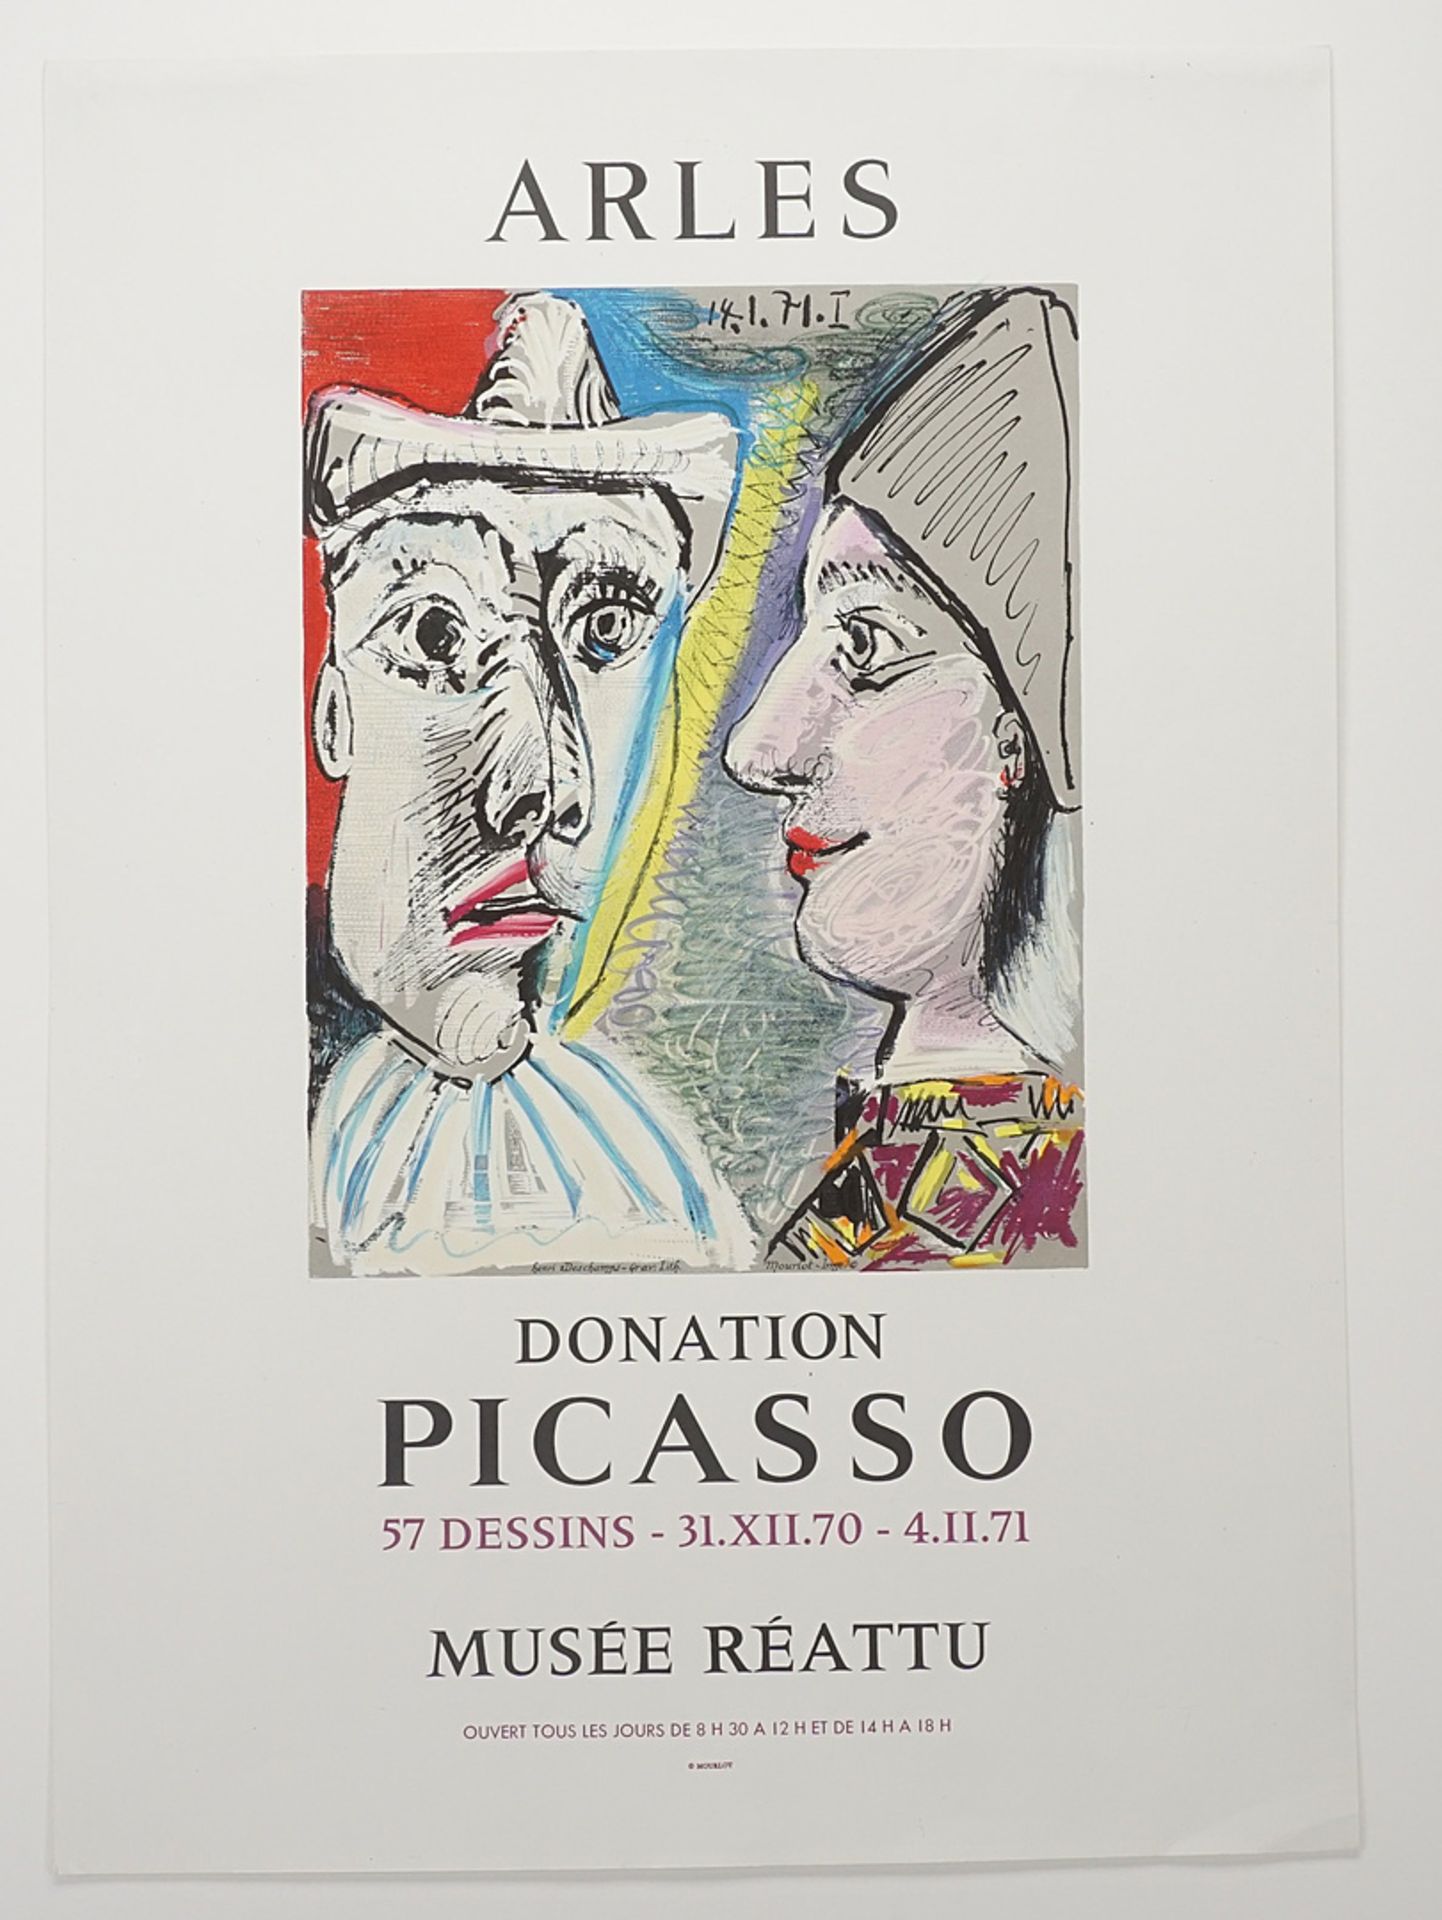 Pablo Picasso (1881-1973), Poster for the exhibition at the Musée Réattu, Arles, 1970/71 - Image 3 of 3